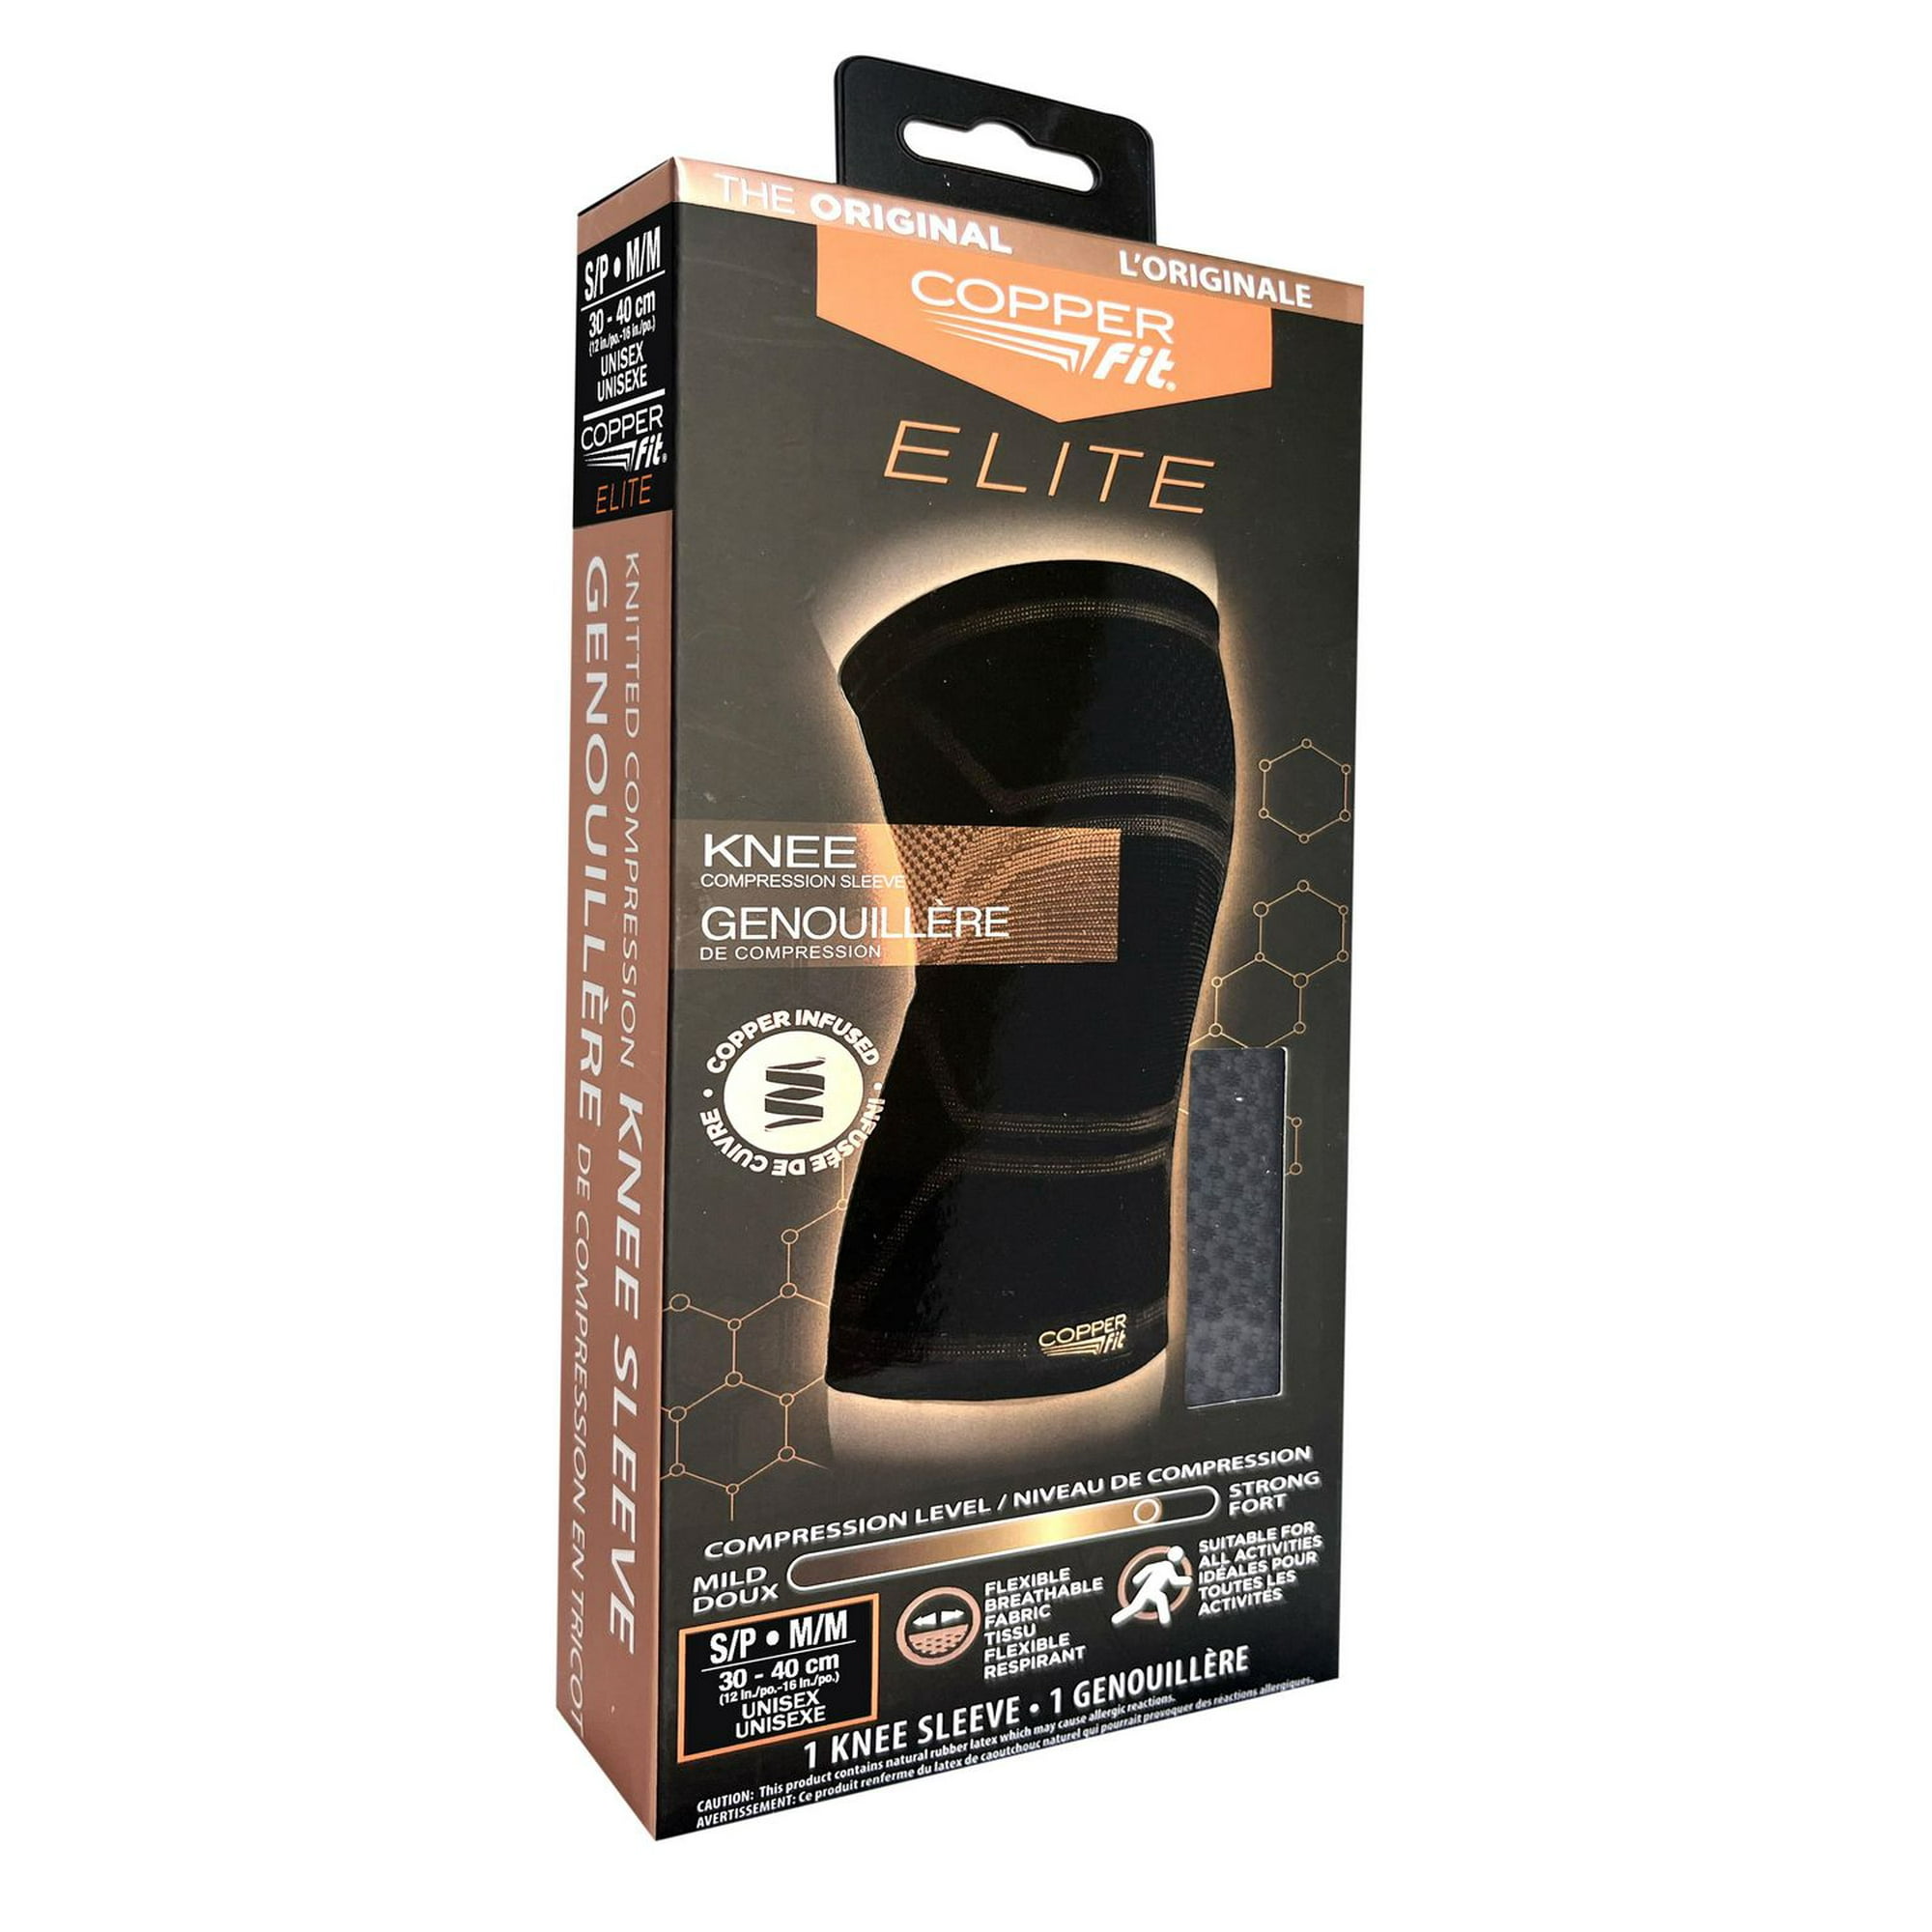 Copper Fit Elite Copper Infused Flexible Knee Compression Sleeve  Large/Extra Large 16-20 Black for All Activities Odor Reducing Unisex